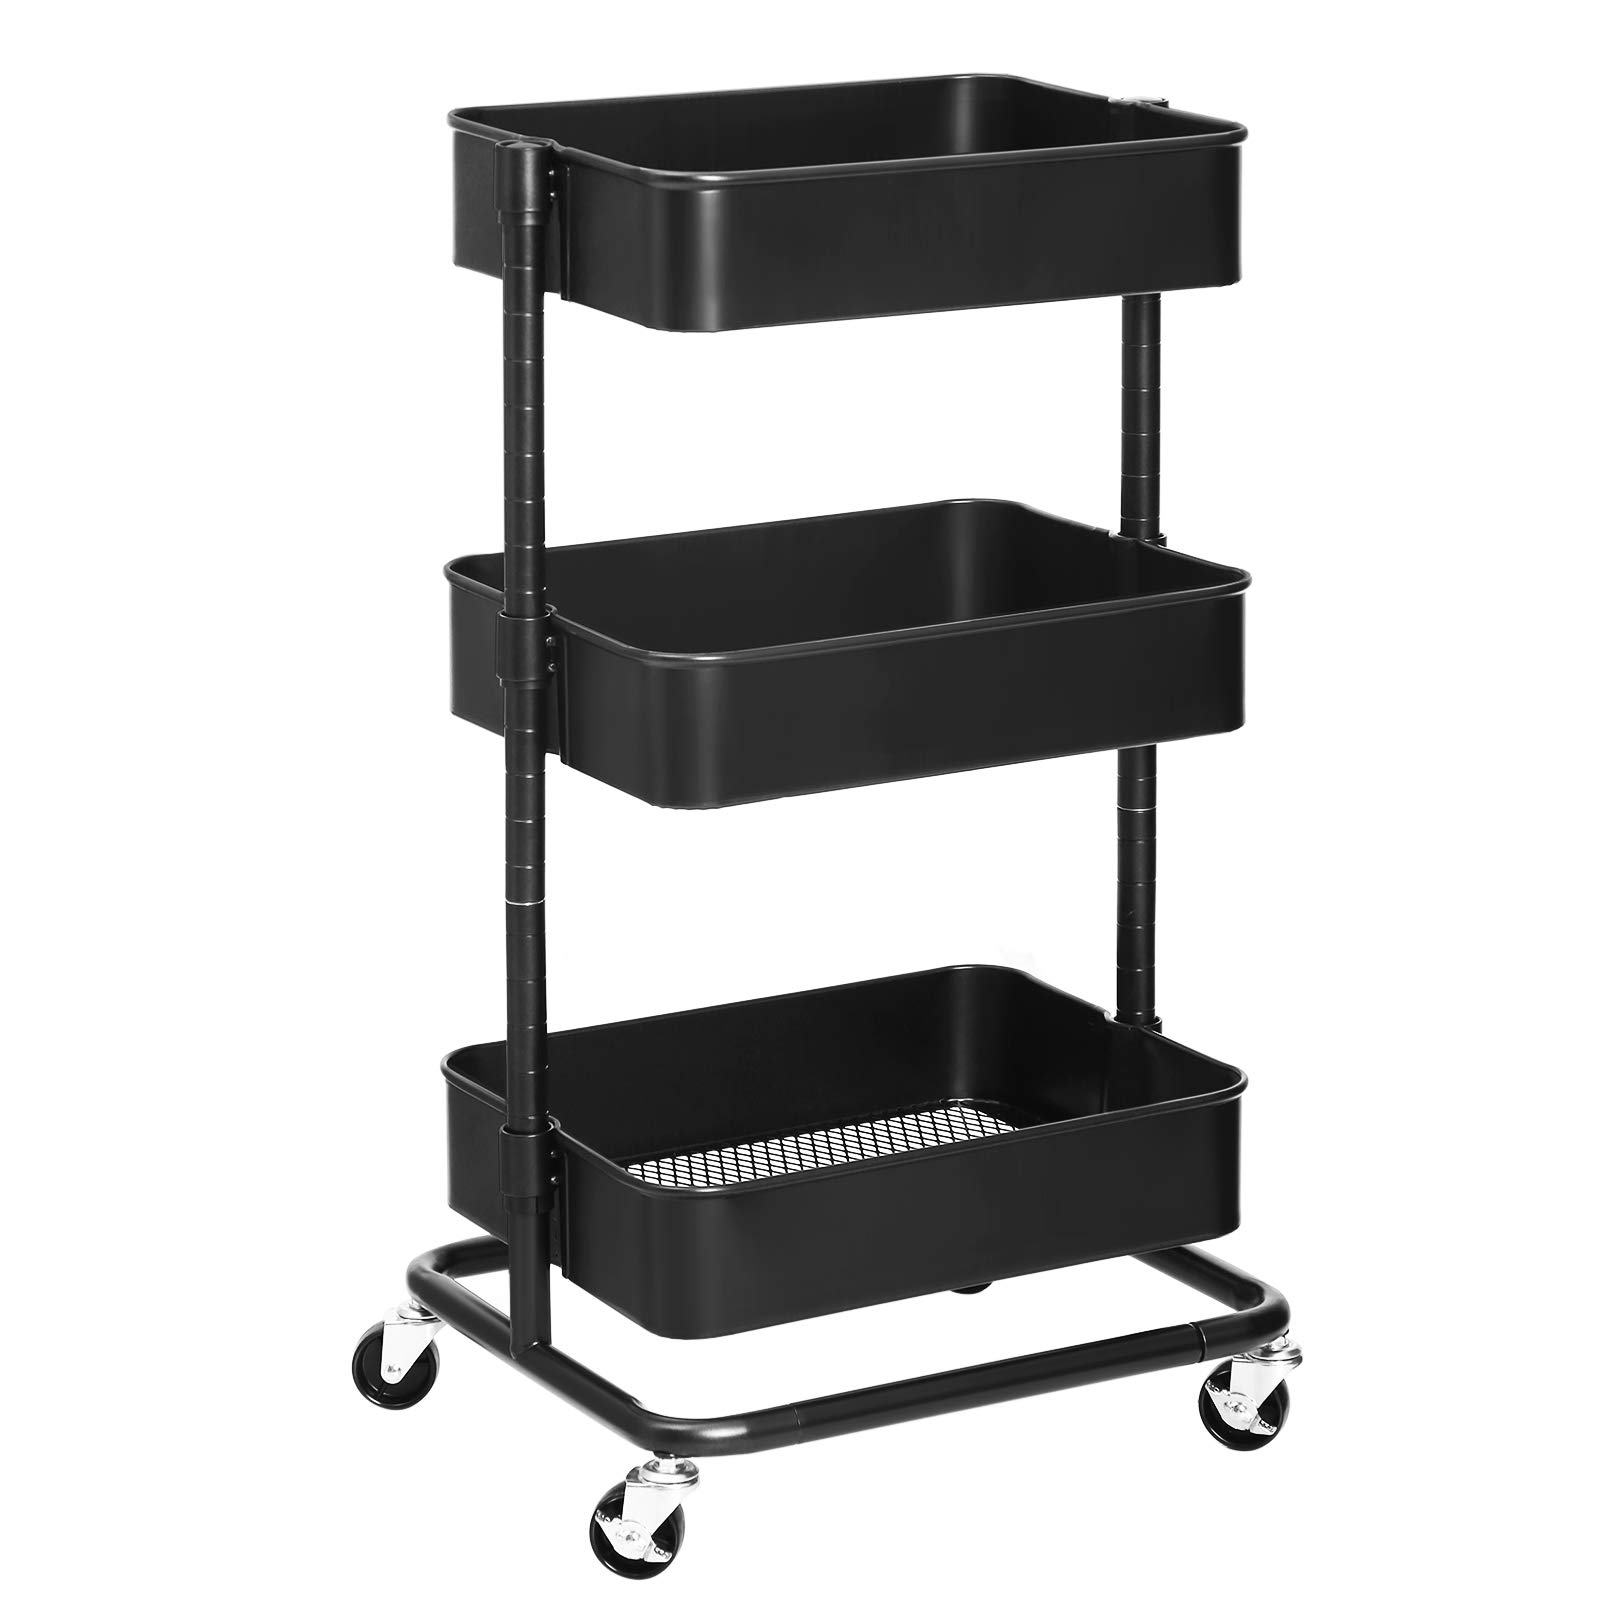 SONGMICS 3-Tier Metal Rolling Cart, Utility Cart, Kitchen Cart with Adjustable Shelves, Storage Trolley with 2 Brakes, Easy Assembly, for Kitchen, ...